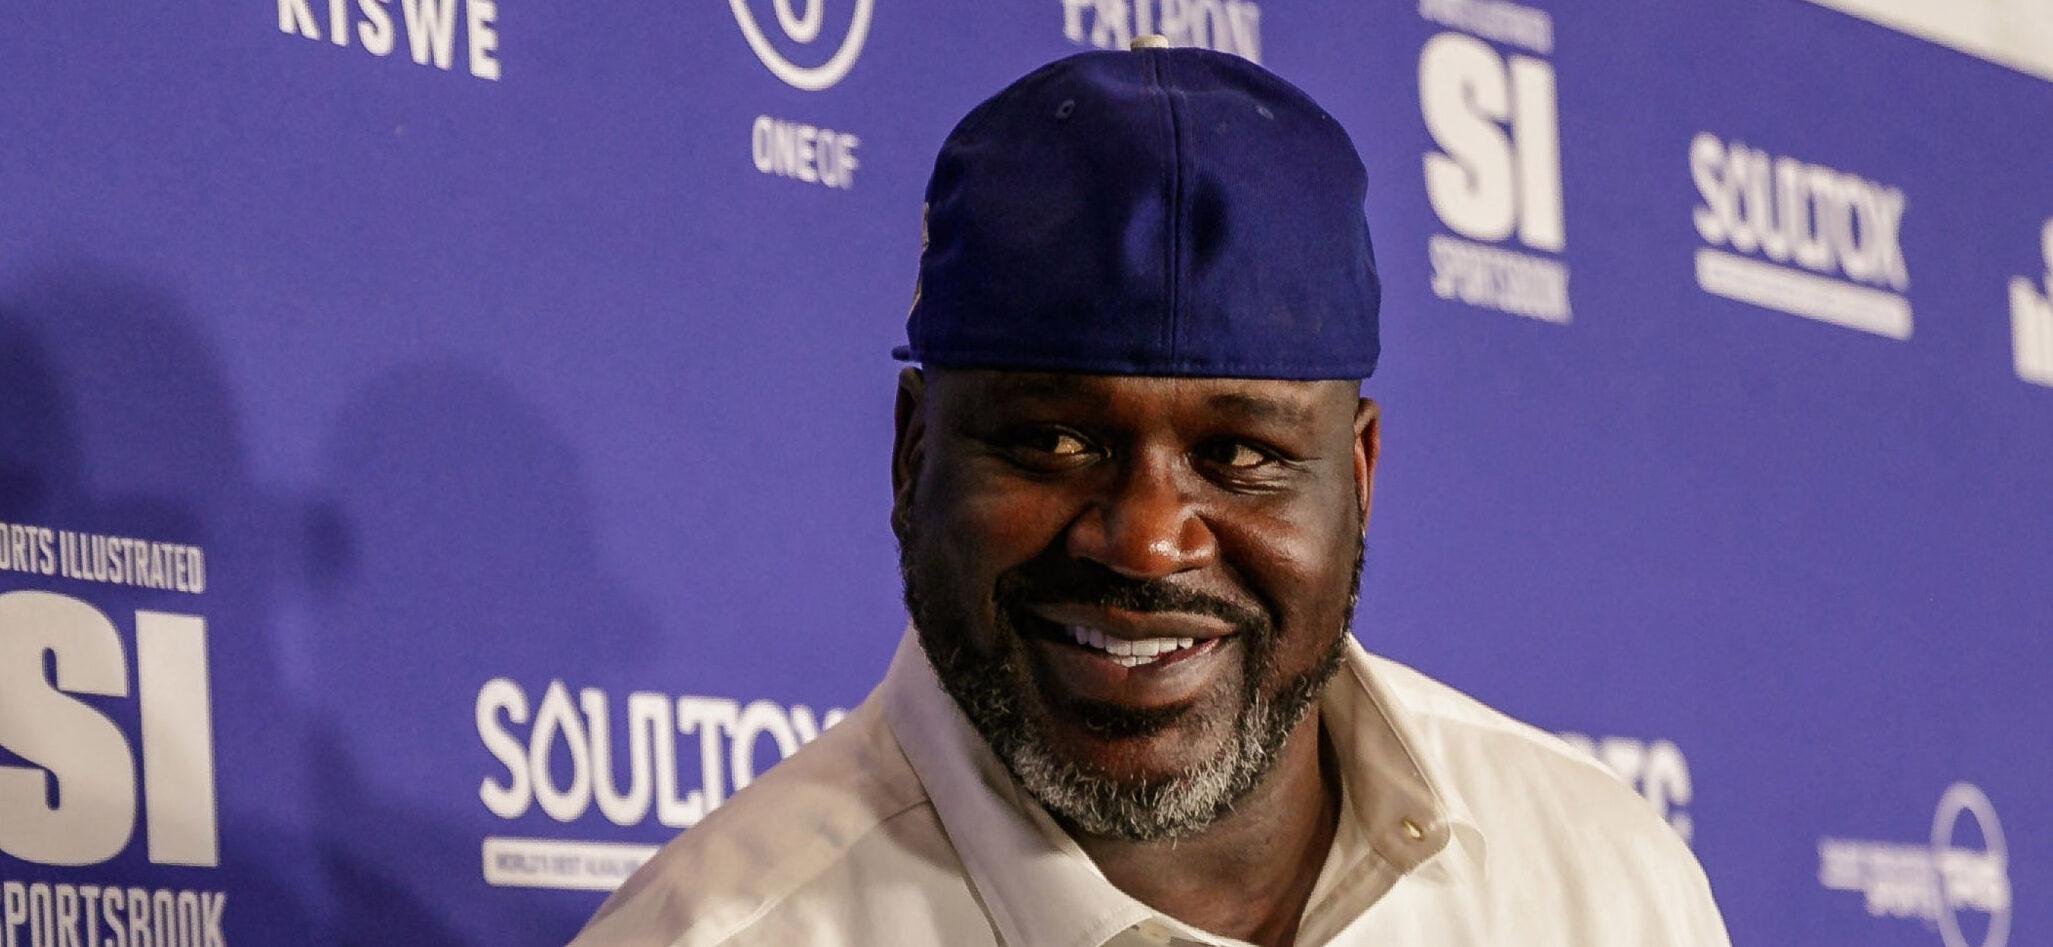 Shaquille O'Neal at the Sports Illustrated Super Bowl Party